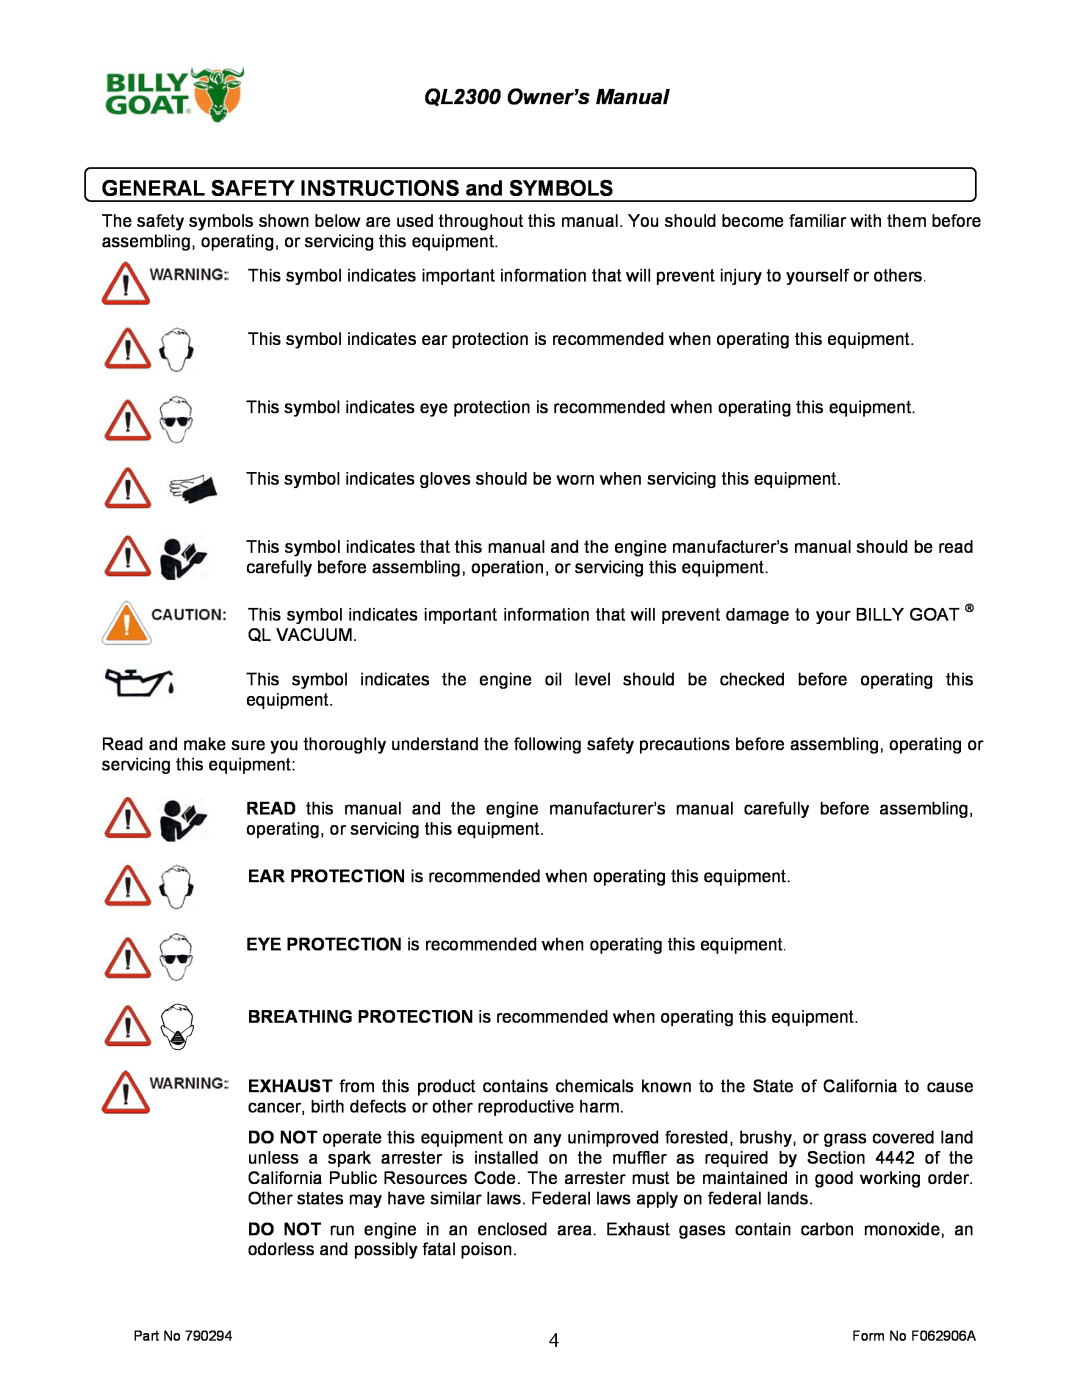 Billy Goat QL2300KO owner manual GENERAL SAFETY INSTRUCTIONS and SYMBOLS, QL2300 Owner’s Manual 